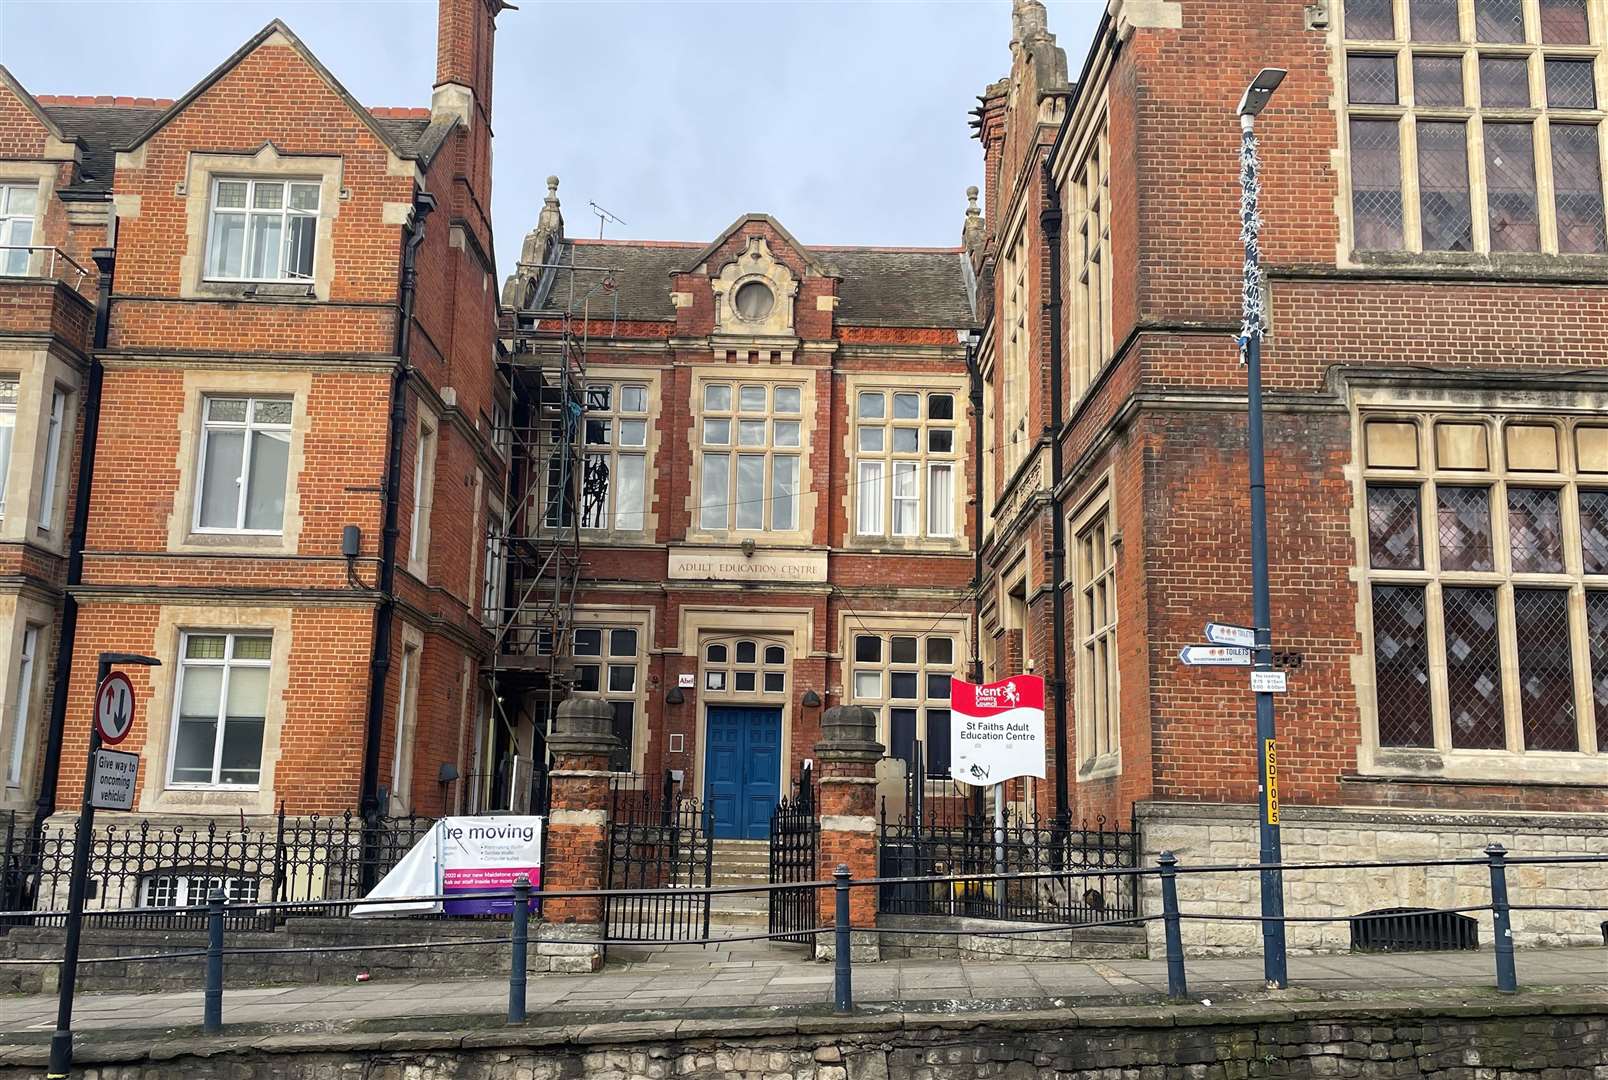 The adult education centre has been sold for £604,000